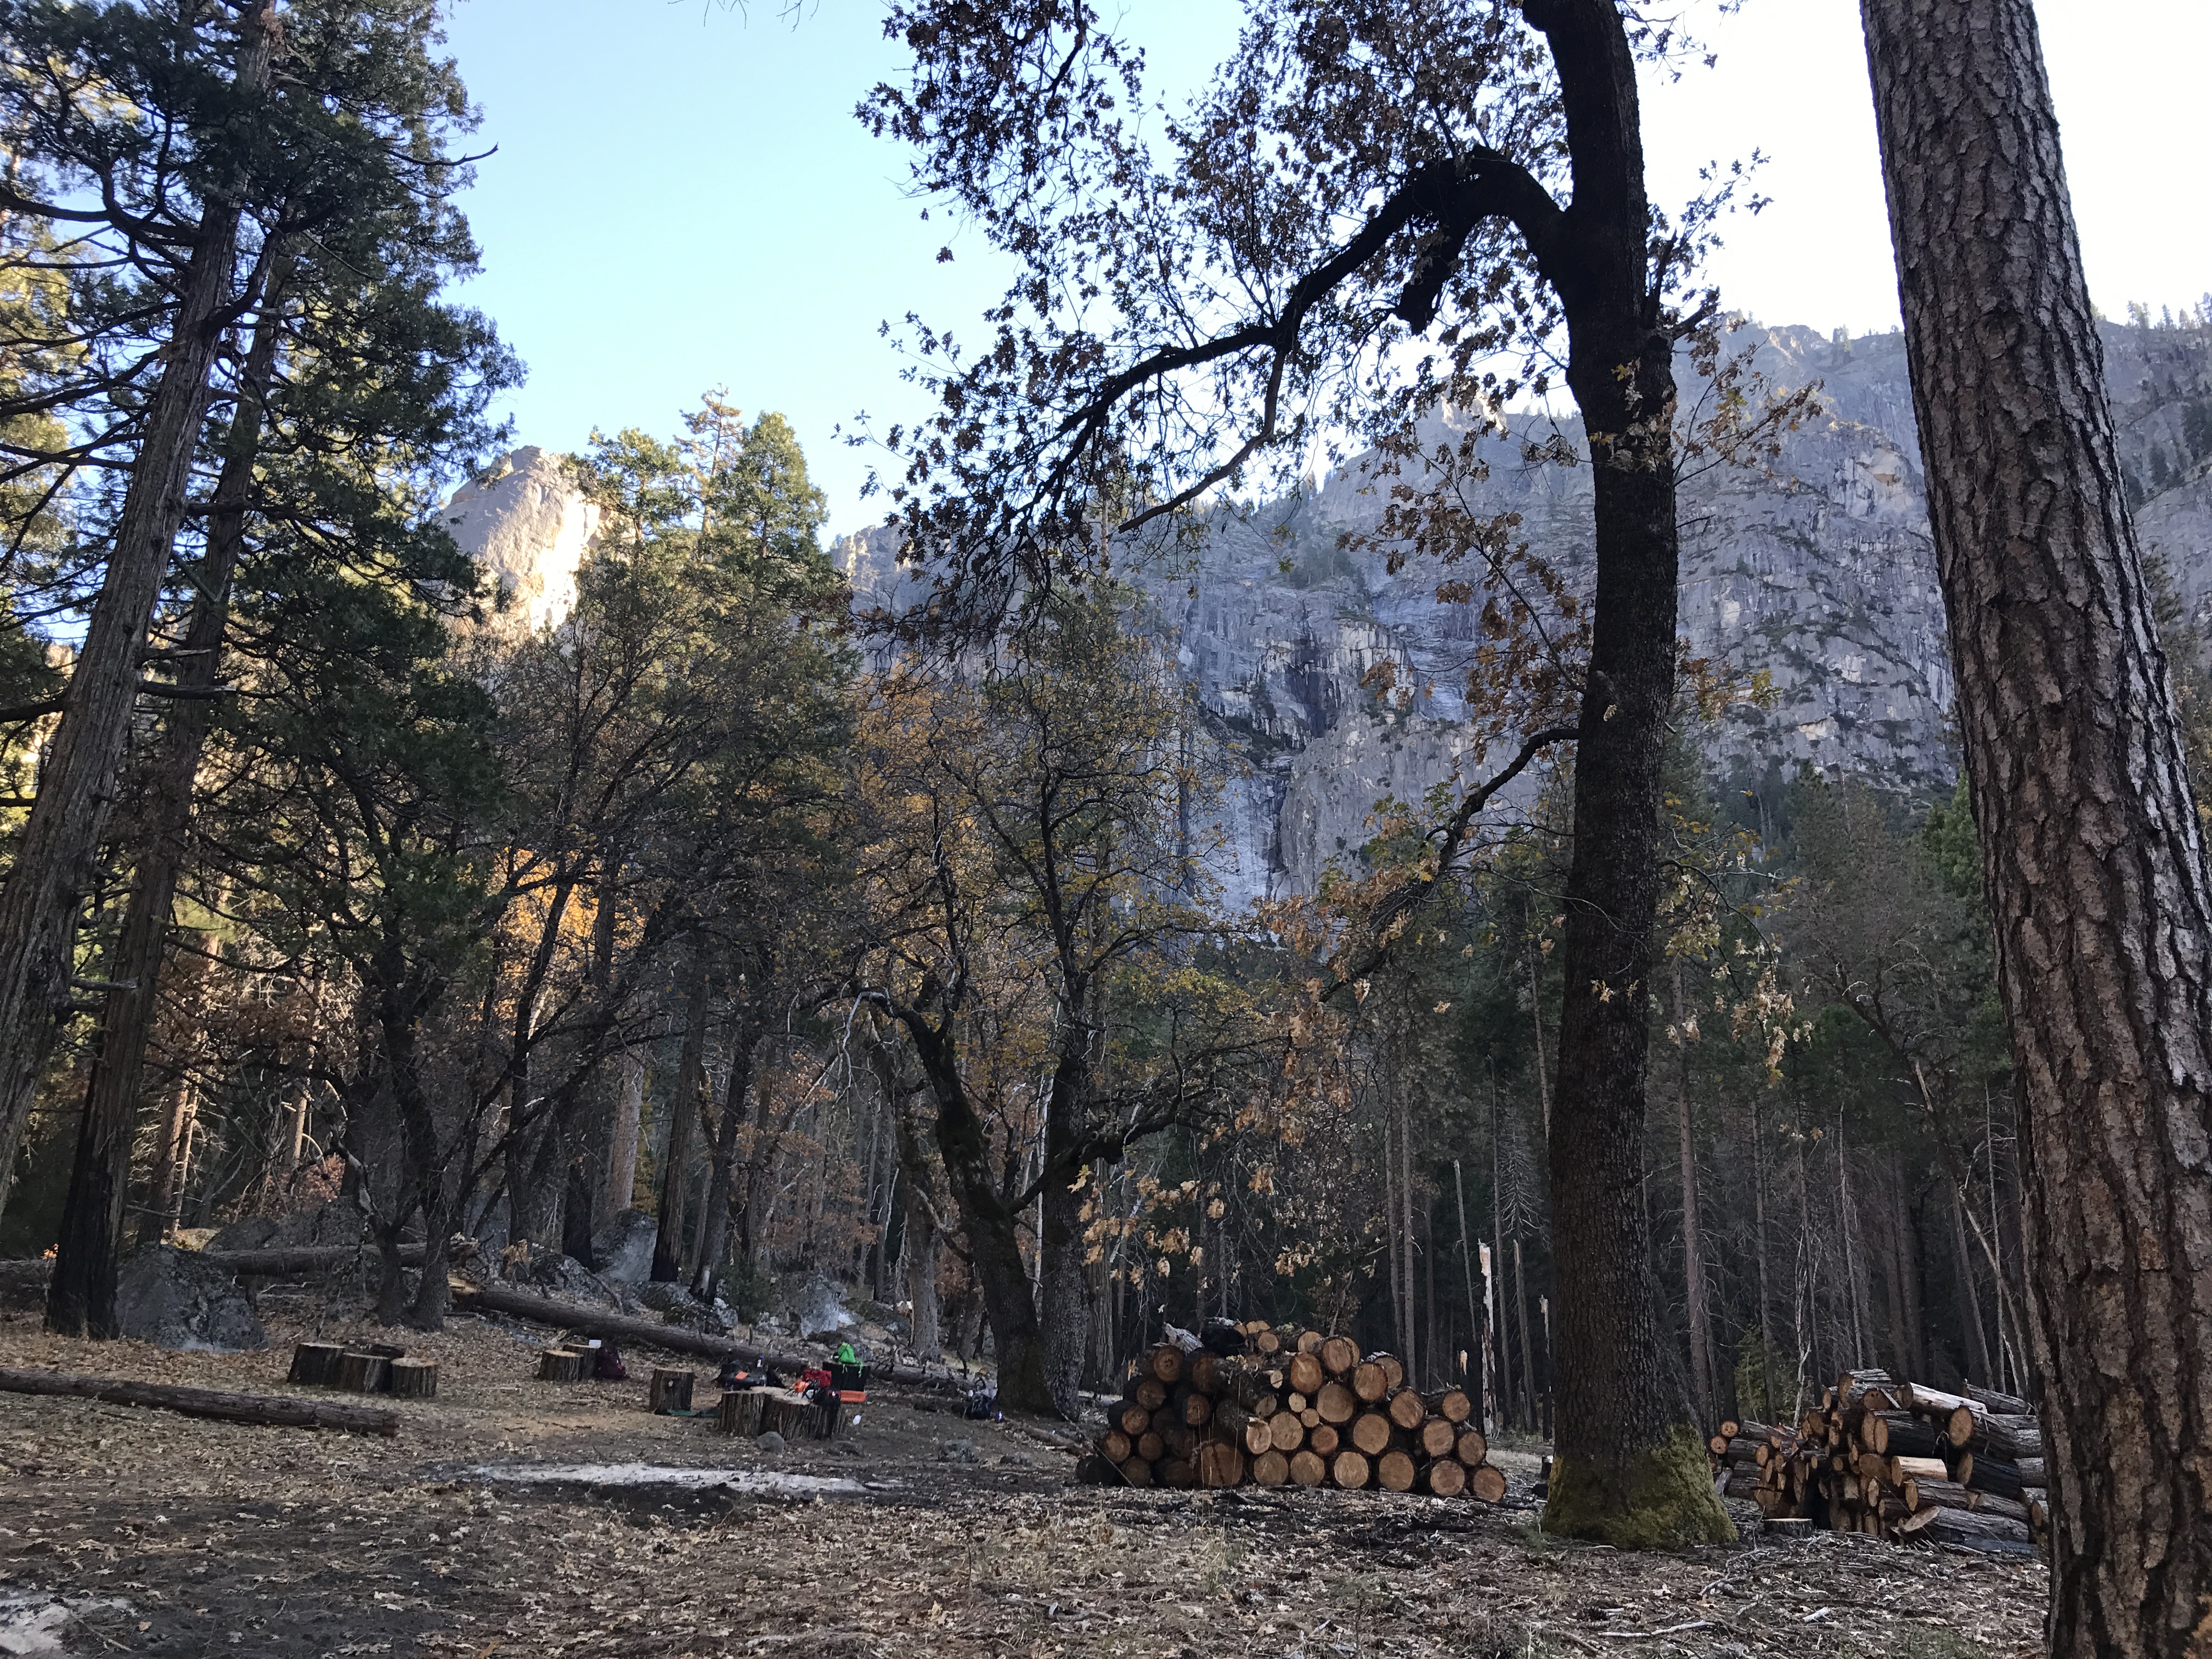 Stacking and piling dead conifers in Yosemite National Park